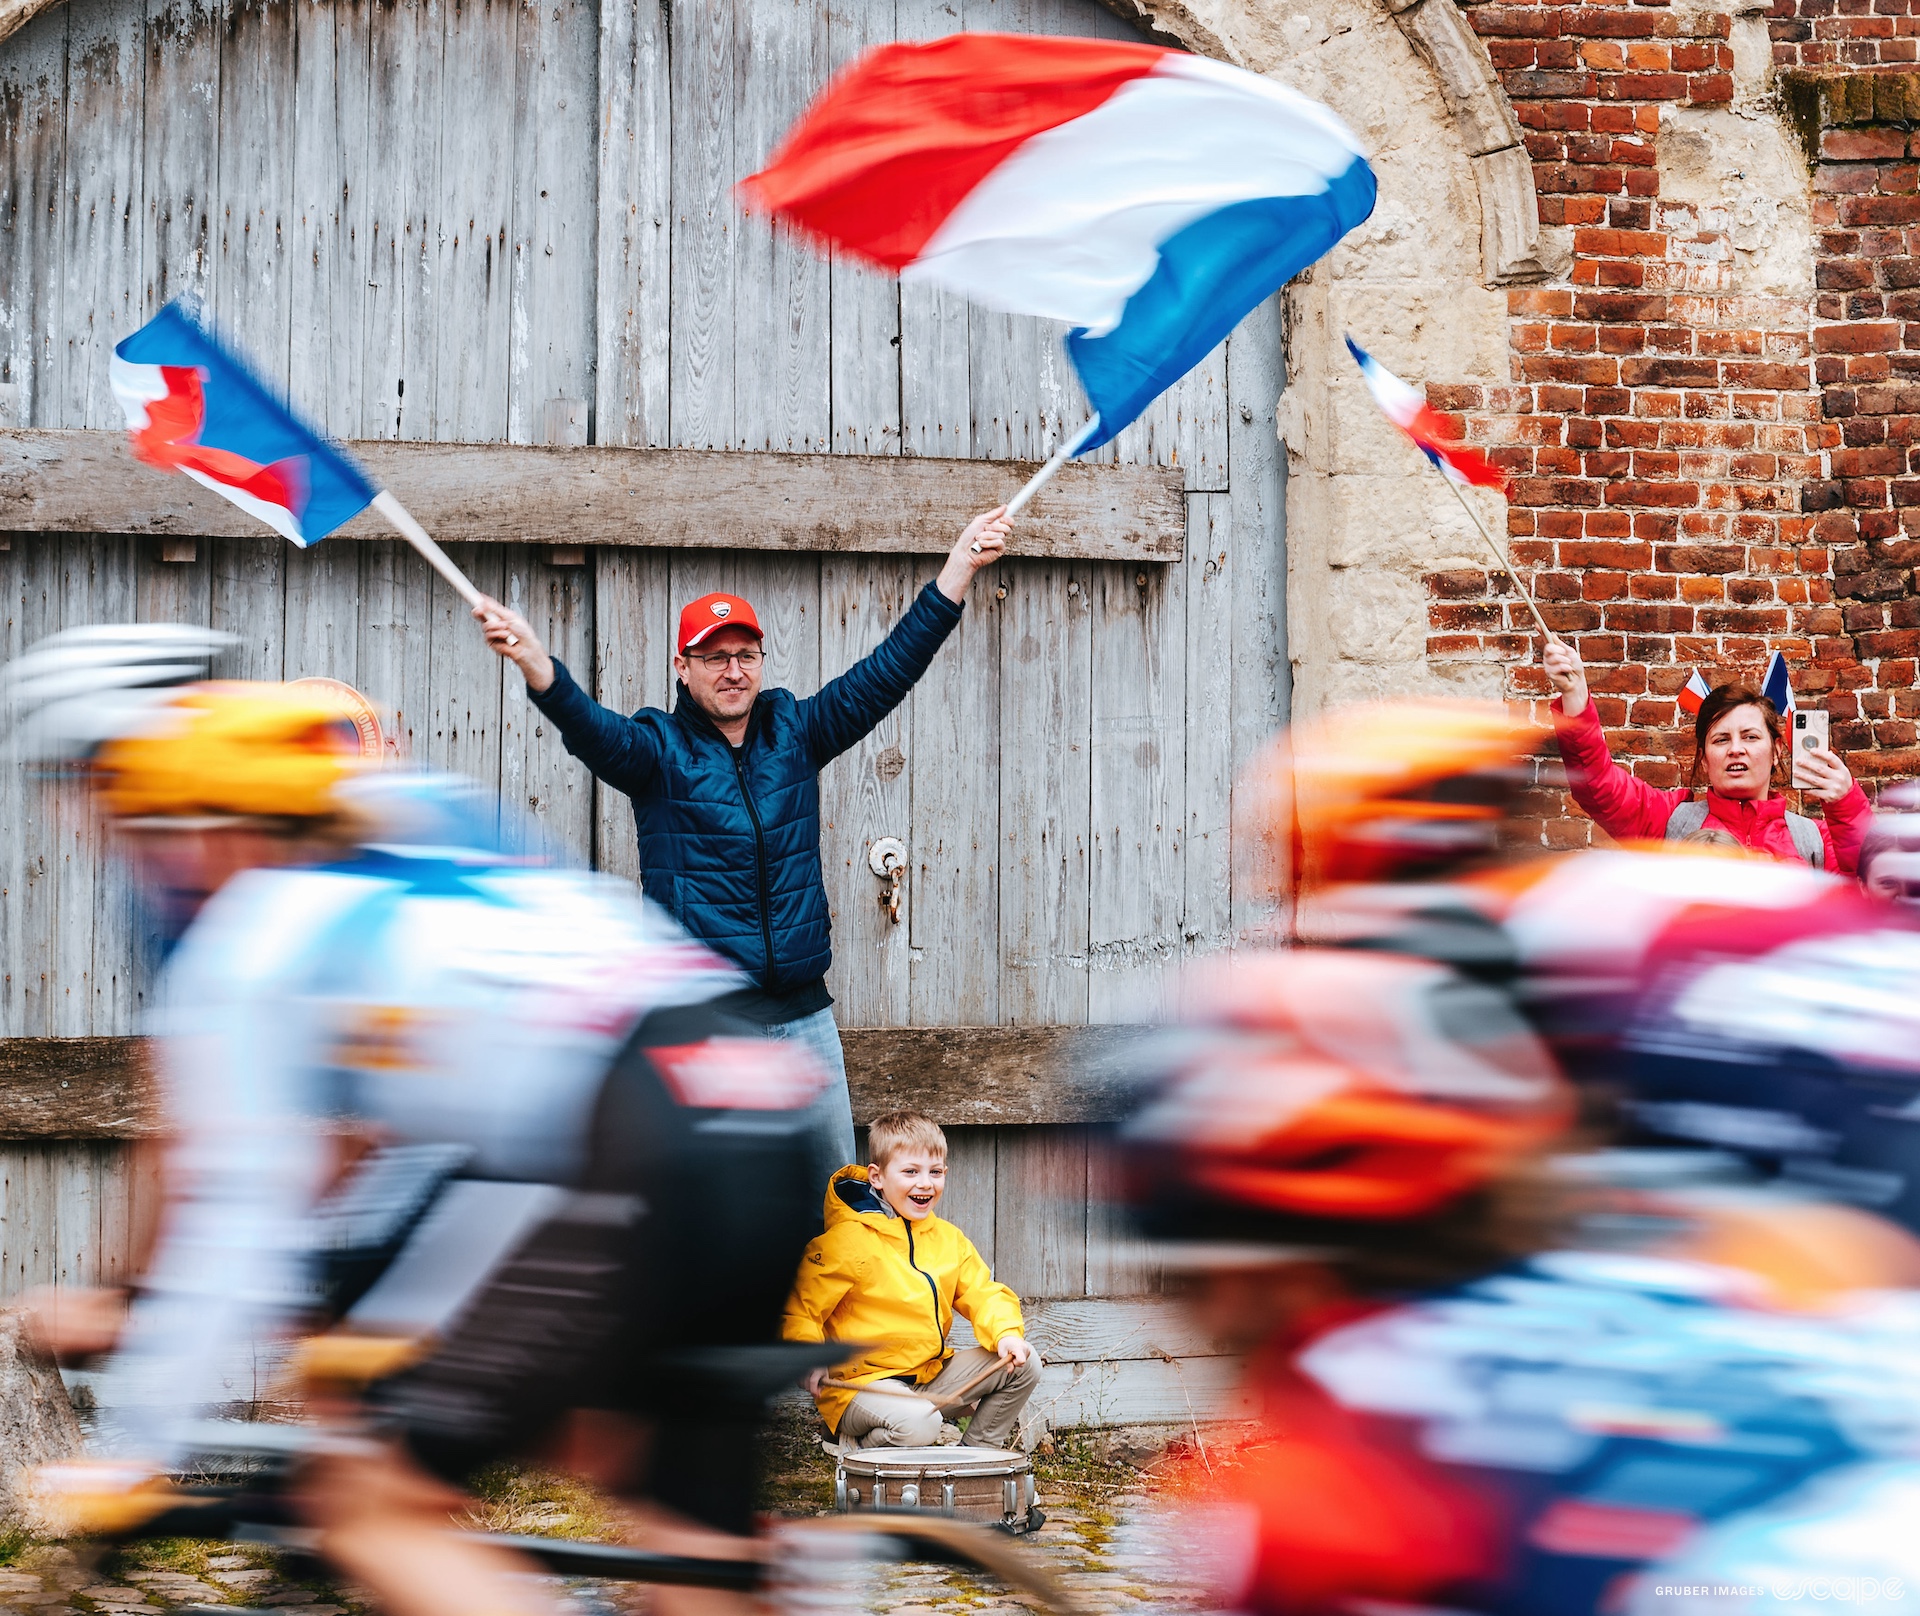 A fan waves French flags at the Paris-Roubaix peloton as they pass in a blur. He stands in front of a large arched door in a red brick building, with his young son at his feet, a delighted look on his face as he plays the drums.